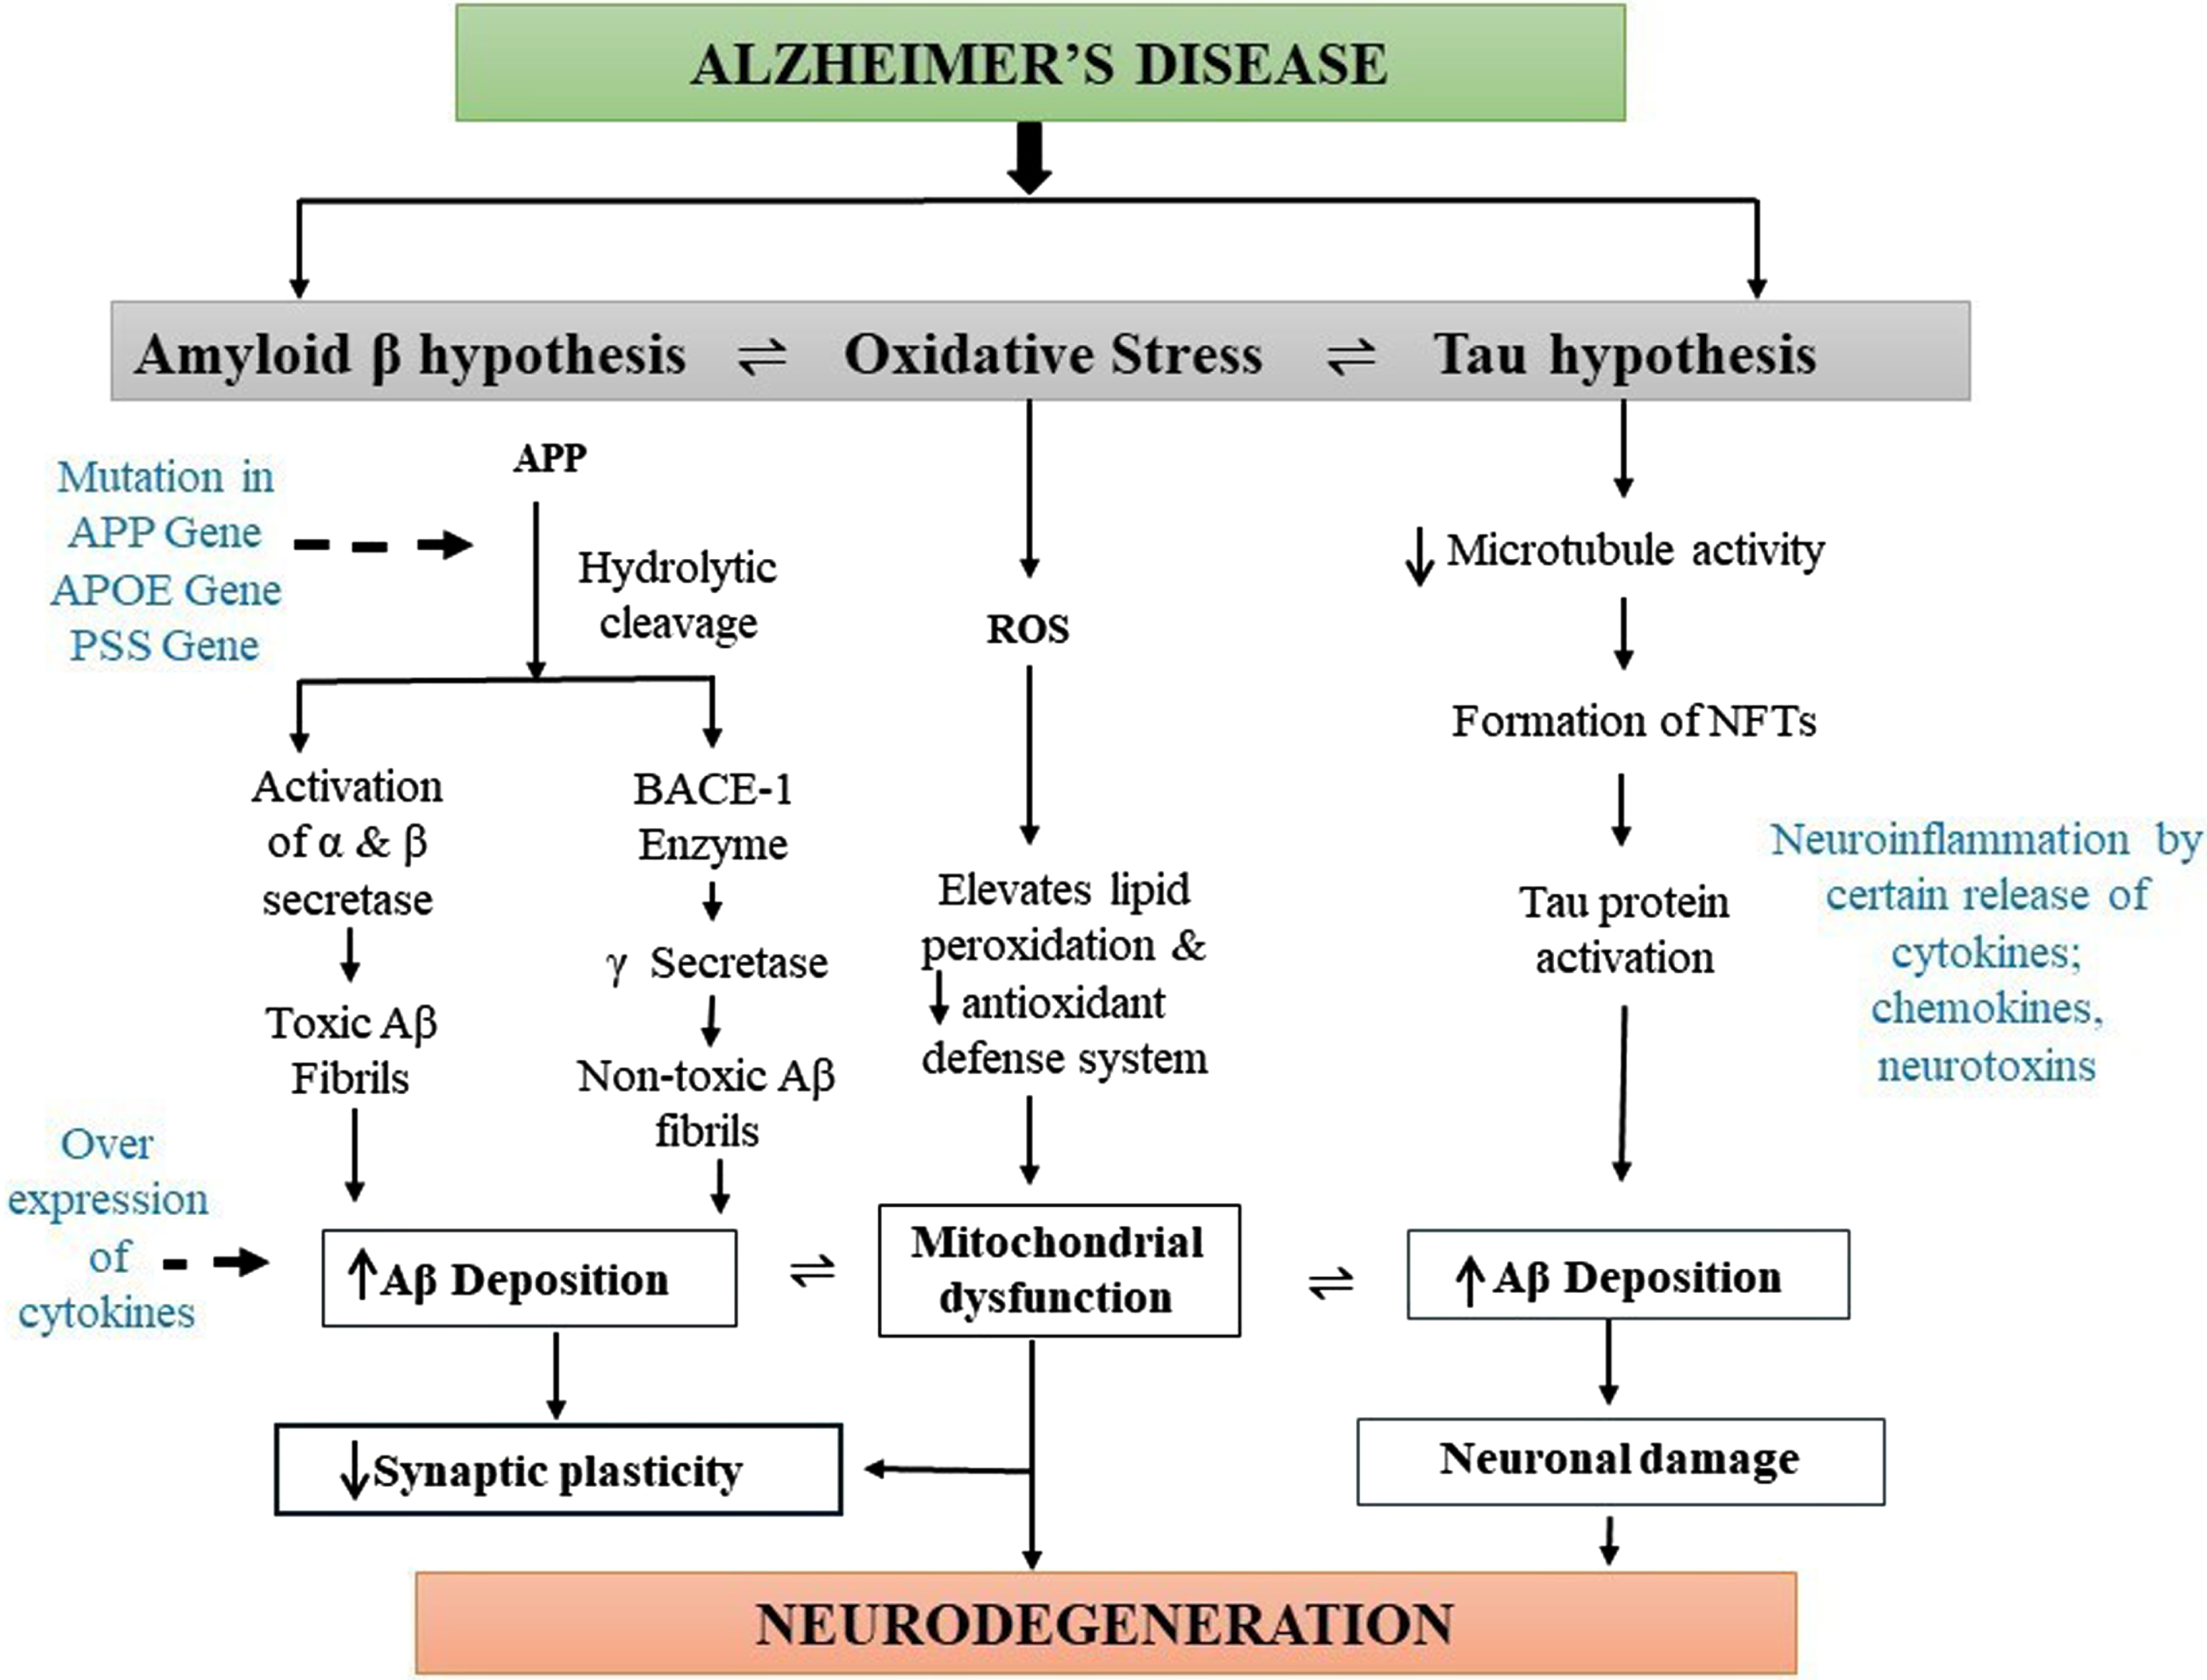 Diagrammatic representation of pathogenesis of Alzheimer’s disease (AD). The main pathophysiology for AD is not known. However, deposition of the amyloid-β (Aβ) plaques, formation of neurofibrillary tangles (NFTs) of hyperphosphorylated tau, and presence of oxidative stress are the main causes of AD pathogenesis. Oxidative stress mainly elevates lipid peroxidation, which significantly decreases the antioxidant defense system and causes mitochondrial dysfunction, leading to synaptic plasticity reduction and neurodegeneration. Deposition of amyloid plaques produces toxic and nontoxic Aβ, which increases the levels of cytokines leading to AD formation. Moreover, hyperphosphorylated tau proteins also cause Aβ aggregation resulting in neuronal damage and the development of AD pathogenesis.